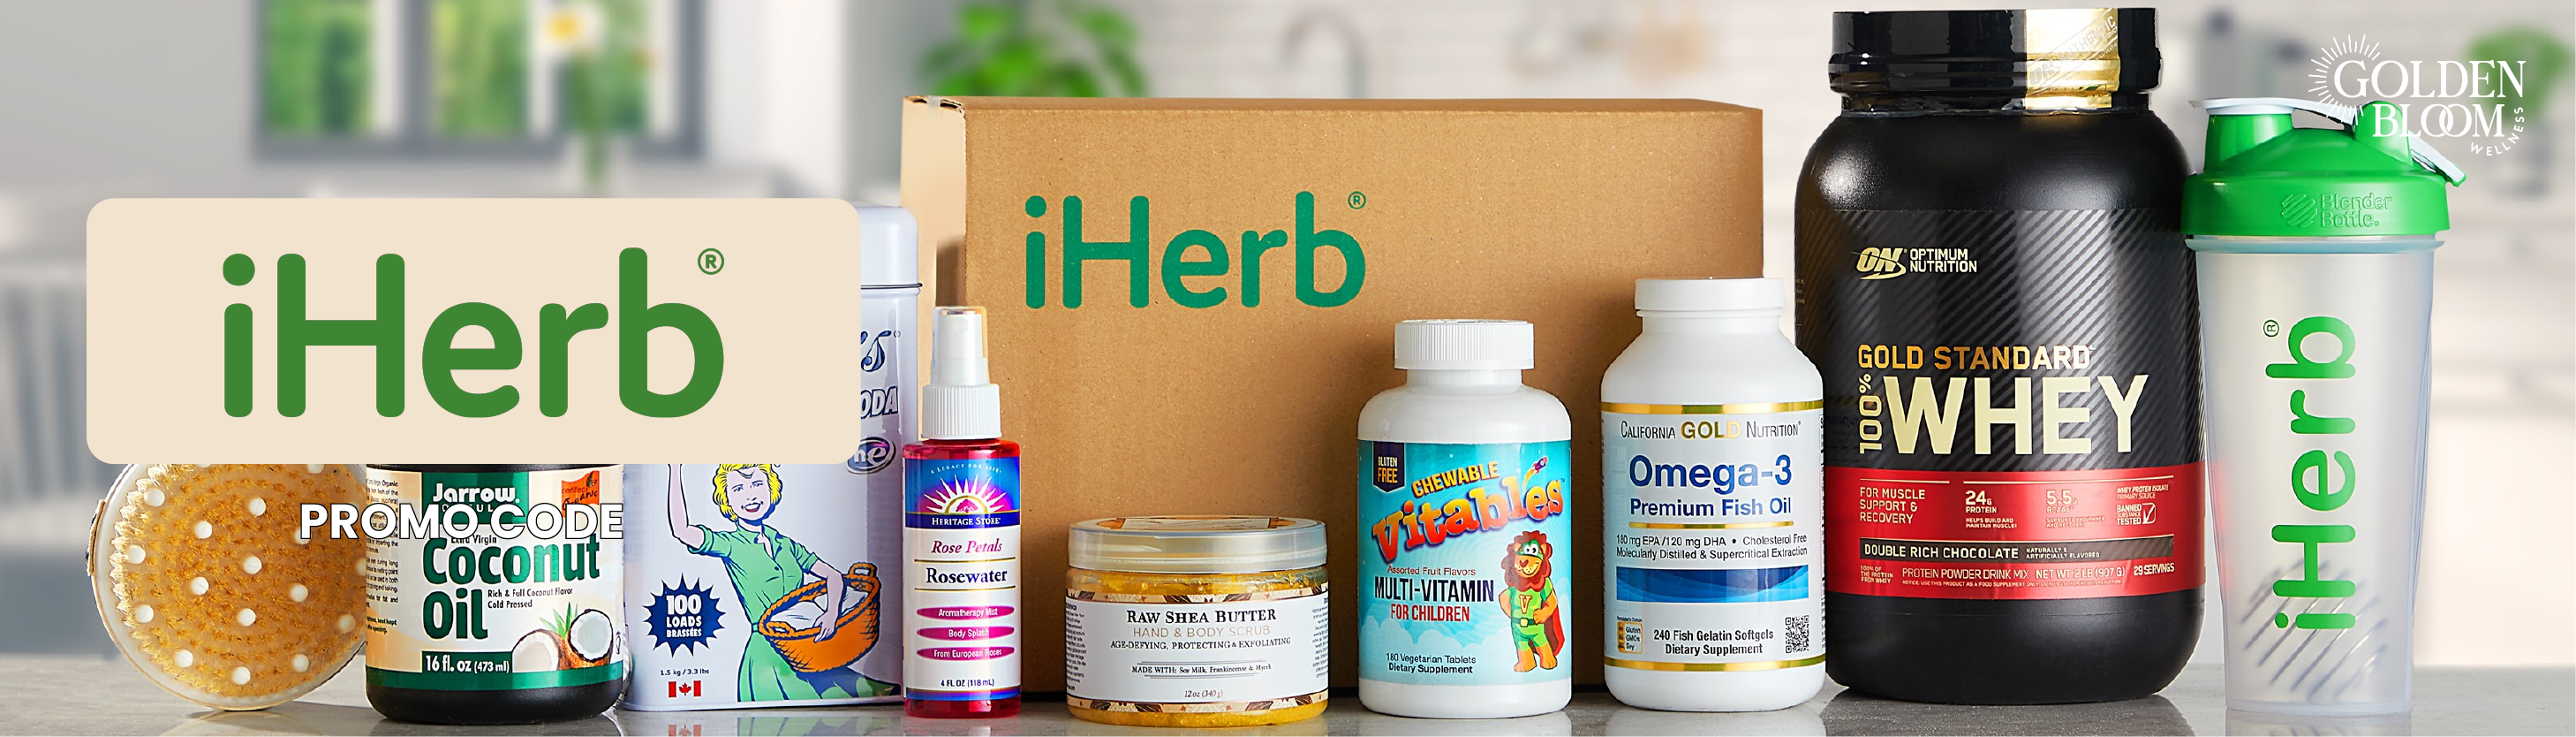 iHerb Featured Image Banner